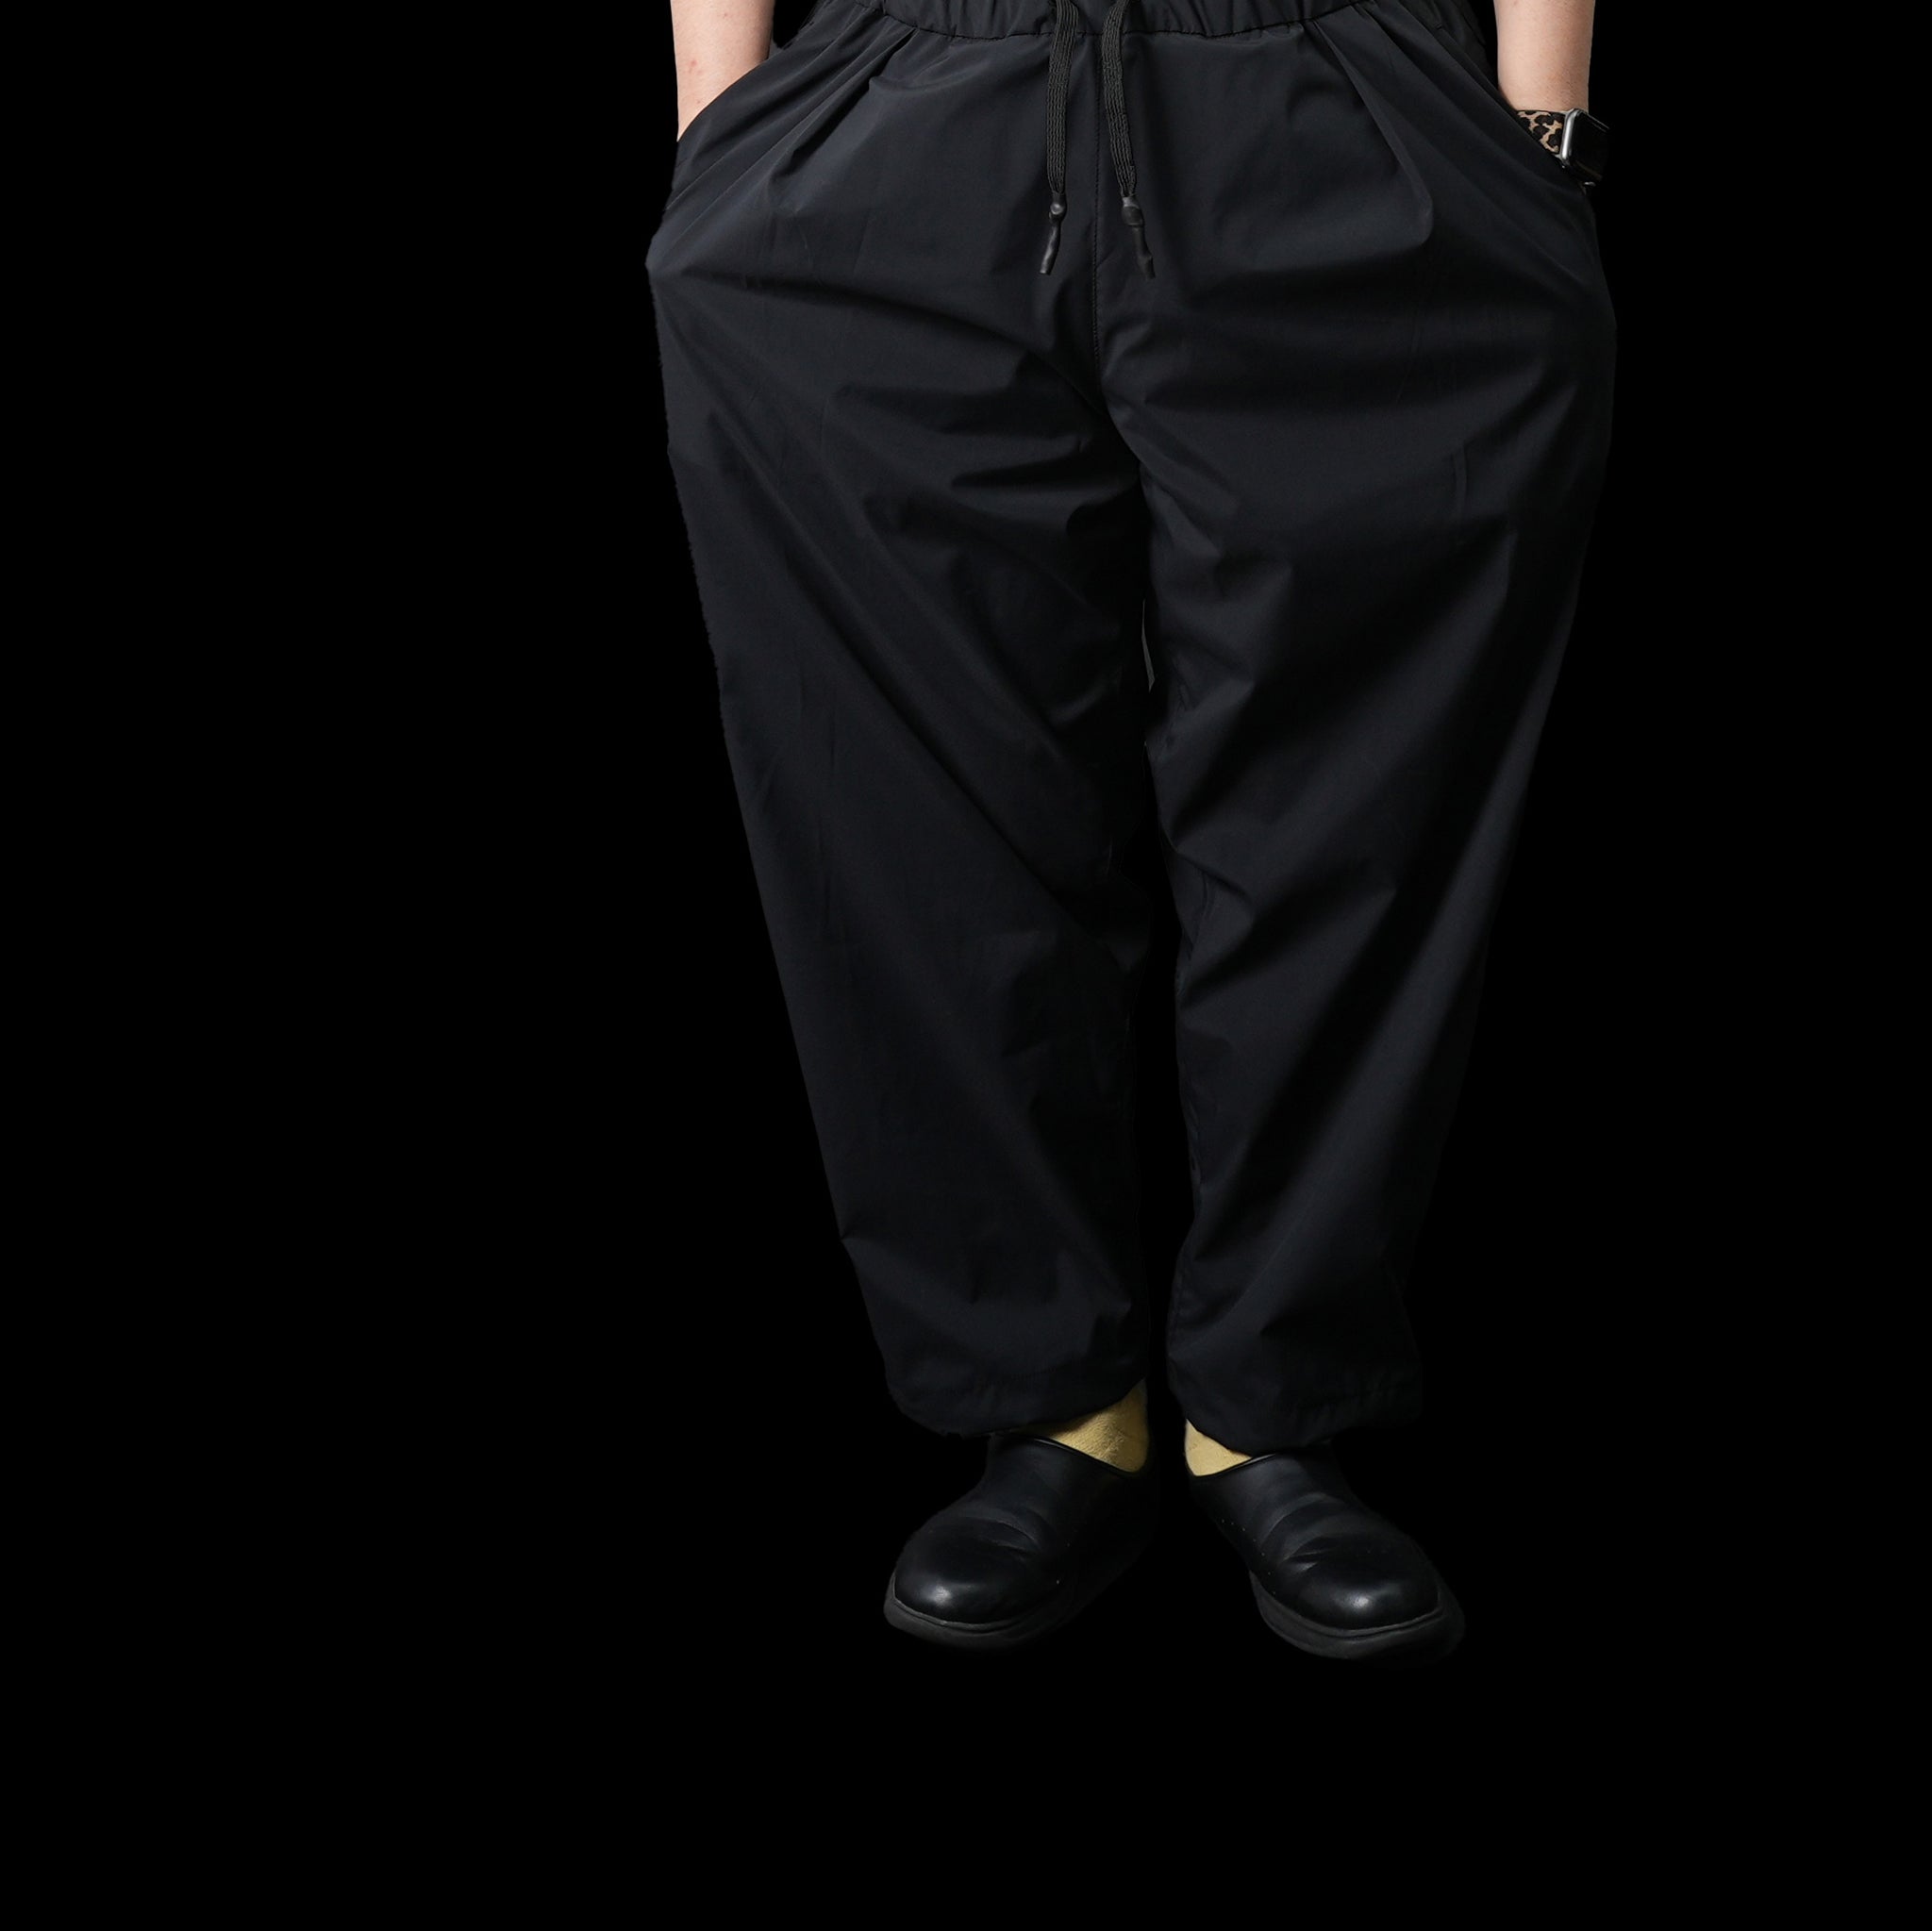 No:UN-014_AW23 | Name:WATER REPELLENT TAPERED STRETCH TRACK PANTS | Co